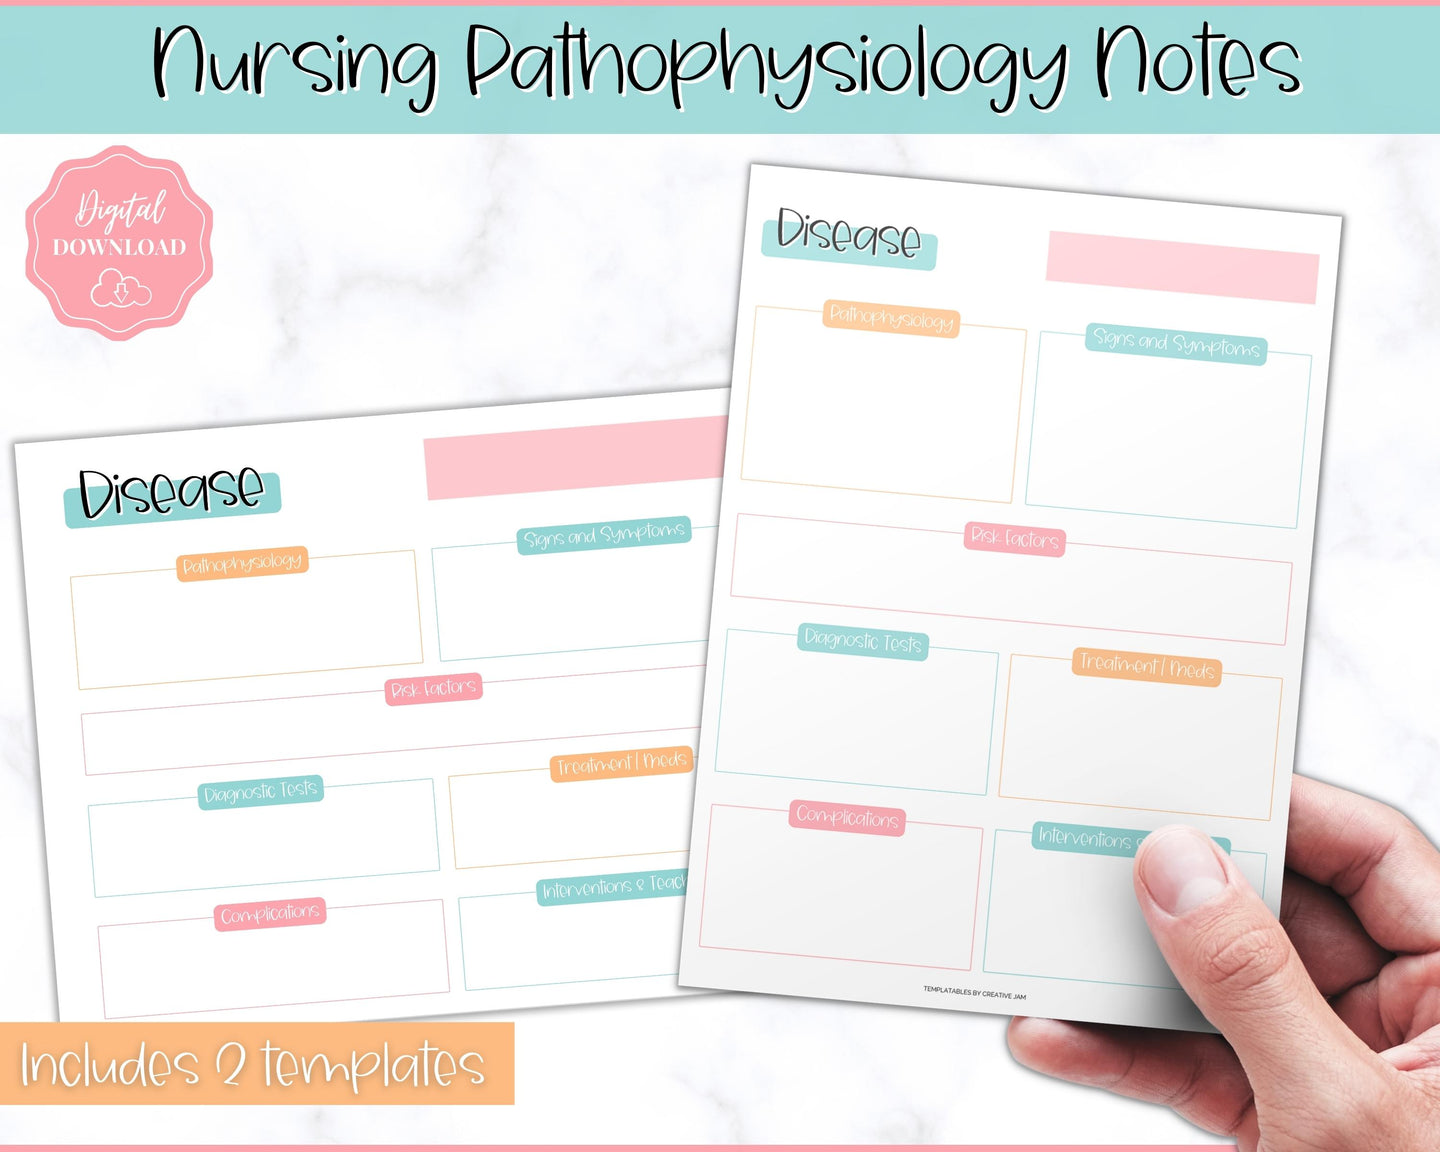 Disease Template, Nursing Patho Pathophysiology Study Guide for Students, Med Surg Brain Sheet, Disease Overview Printable | Colorful Sky